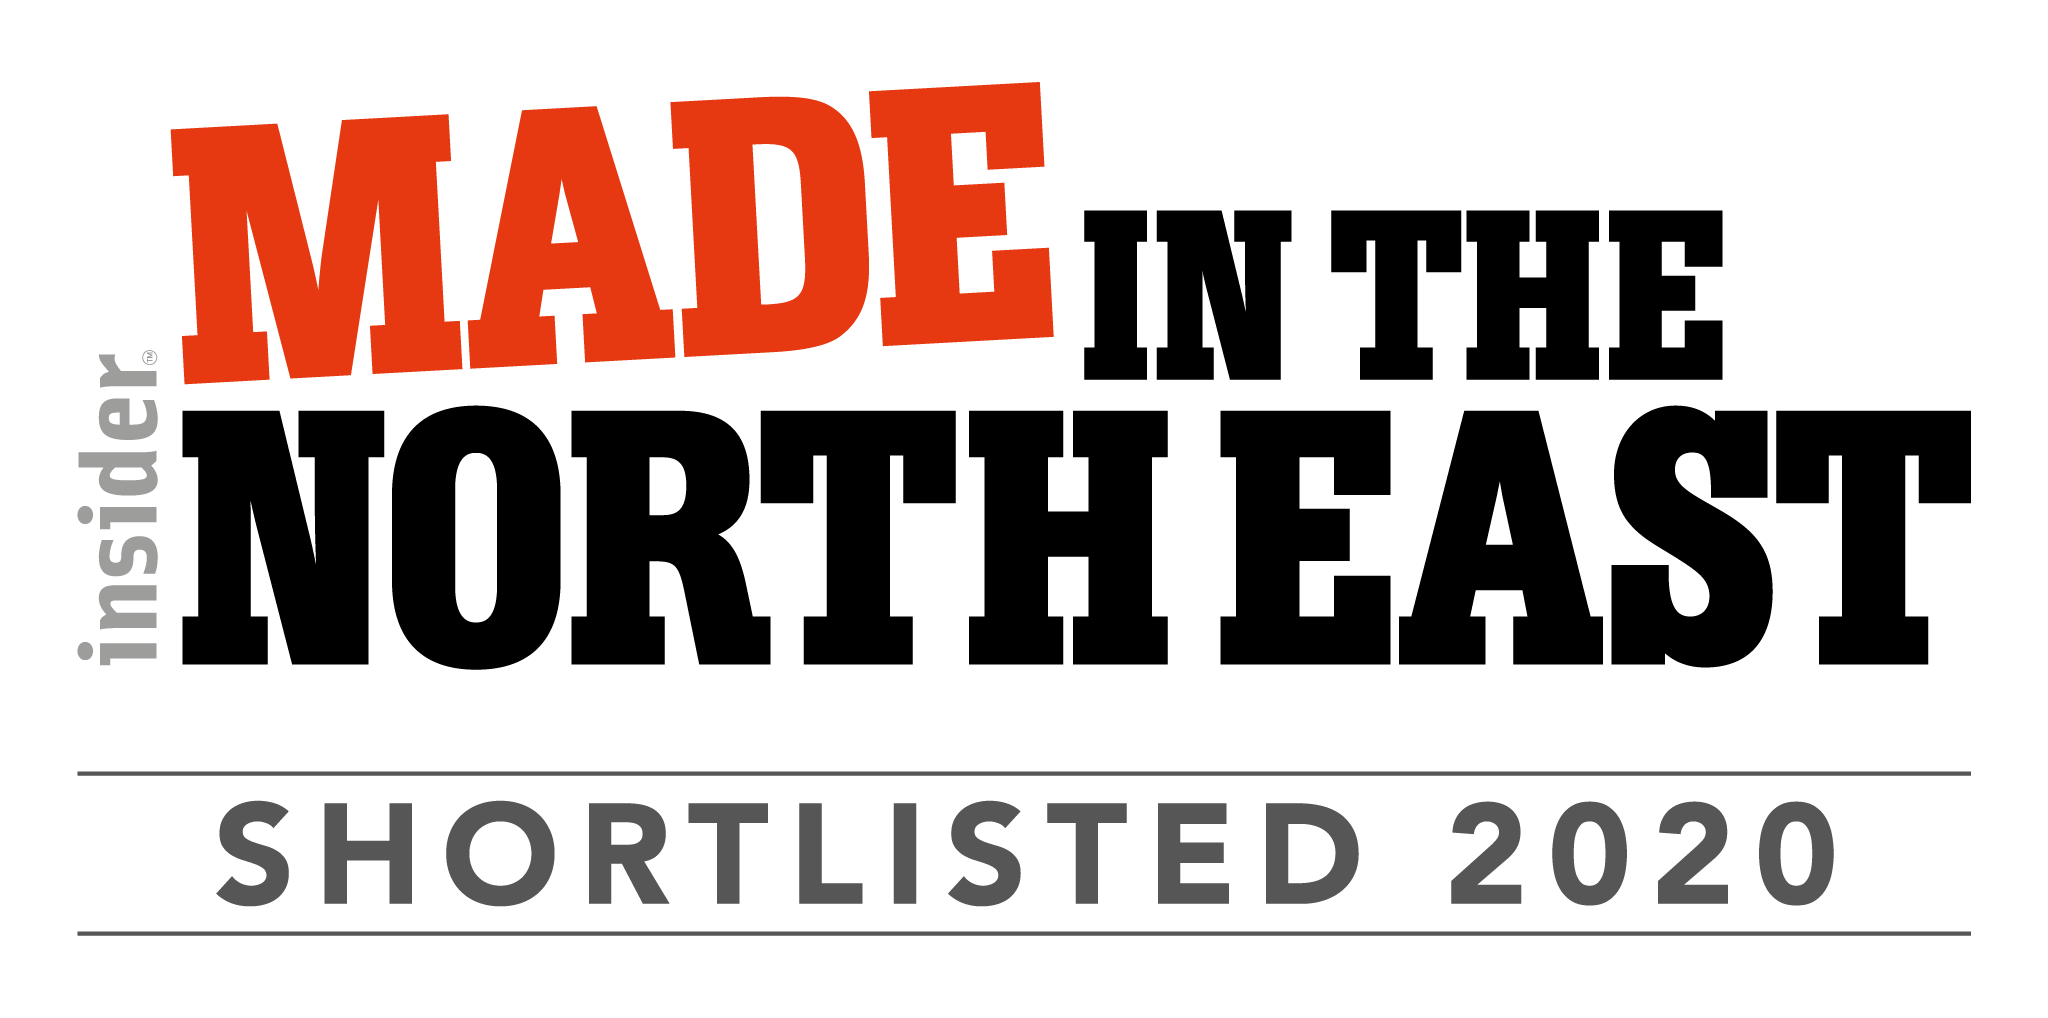 The Expanded Metal Company is shortlisted for prestigious innovation award